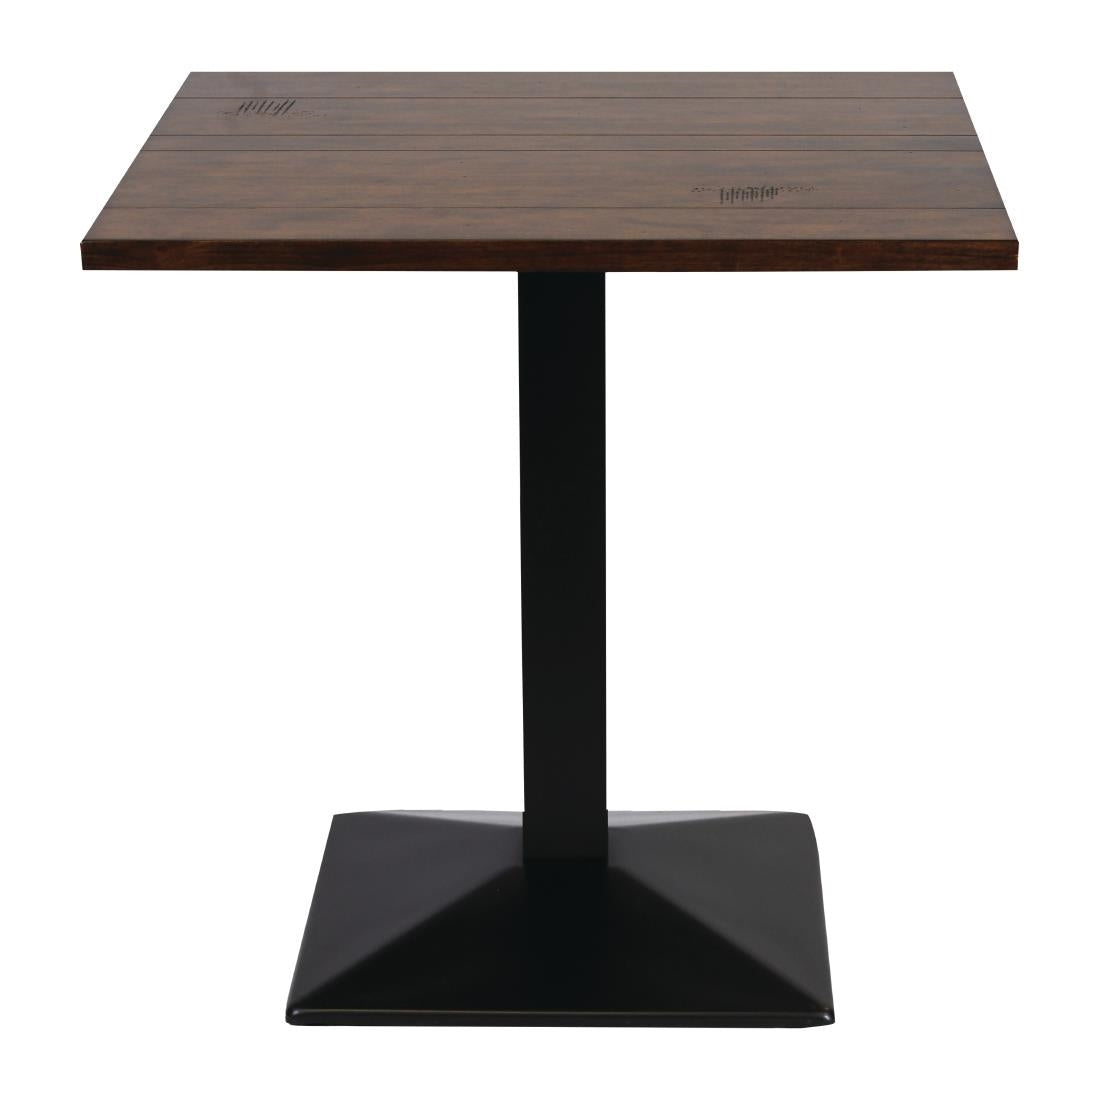 FT512 Turin Metal Base Pedestal Square Table with Vintage Top 760x760mm JD Catering Equipment Solutions Ltd